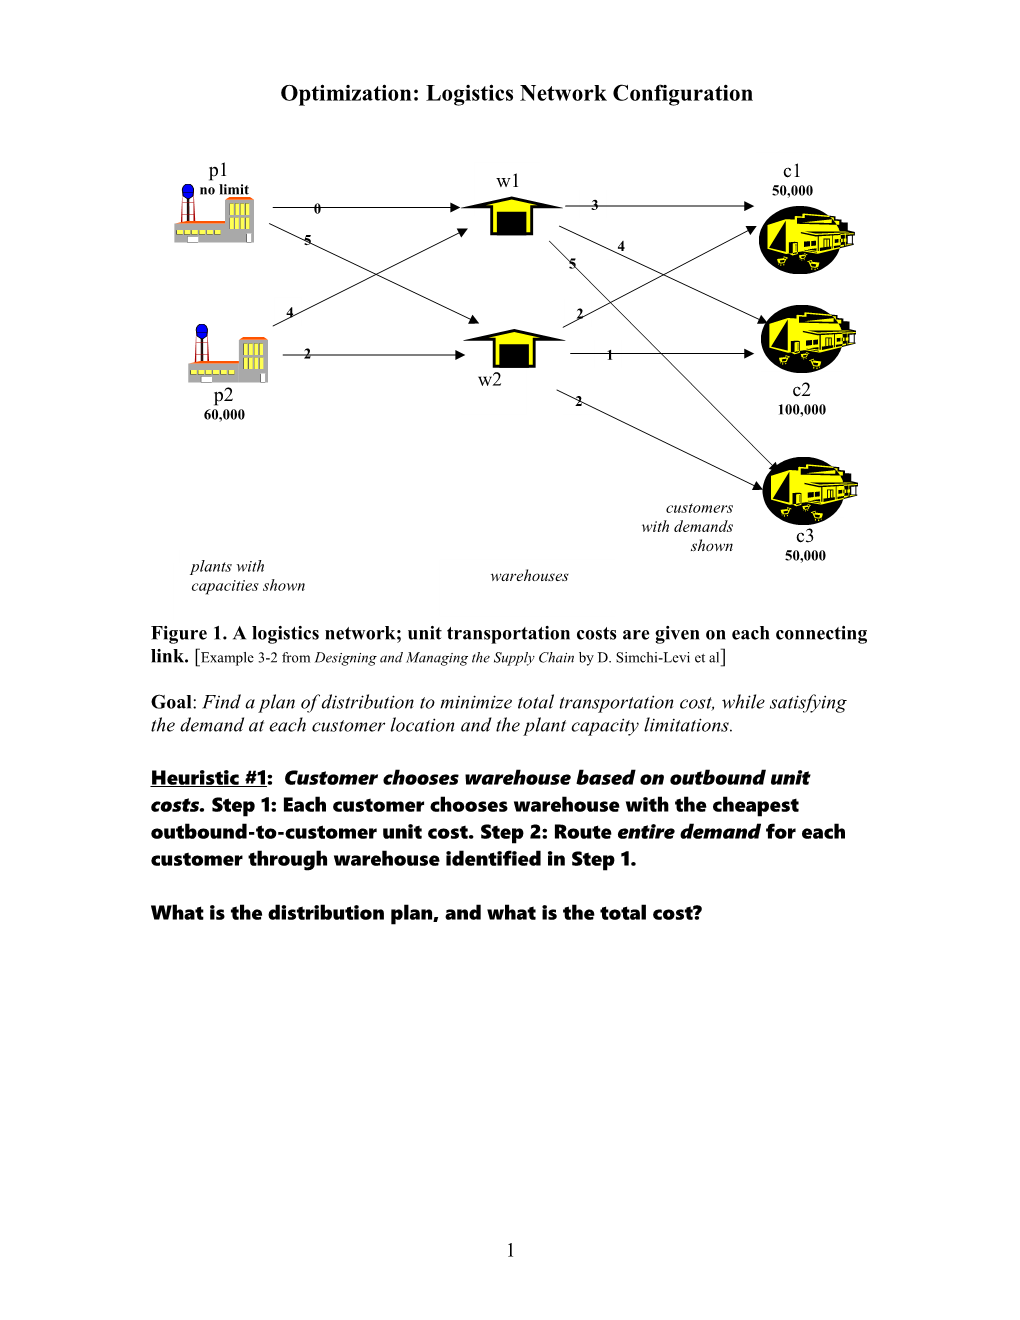 Figure 1. a Logistics Network; Unit Transportation Costs Are Given on Each Connecting